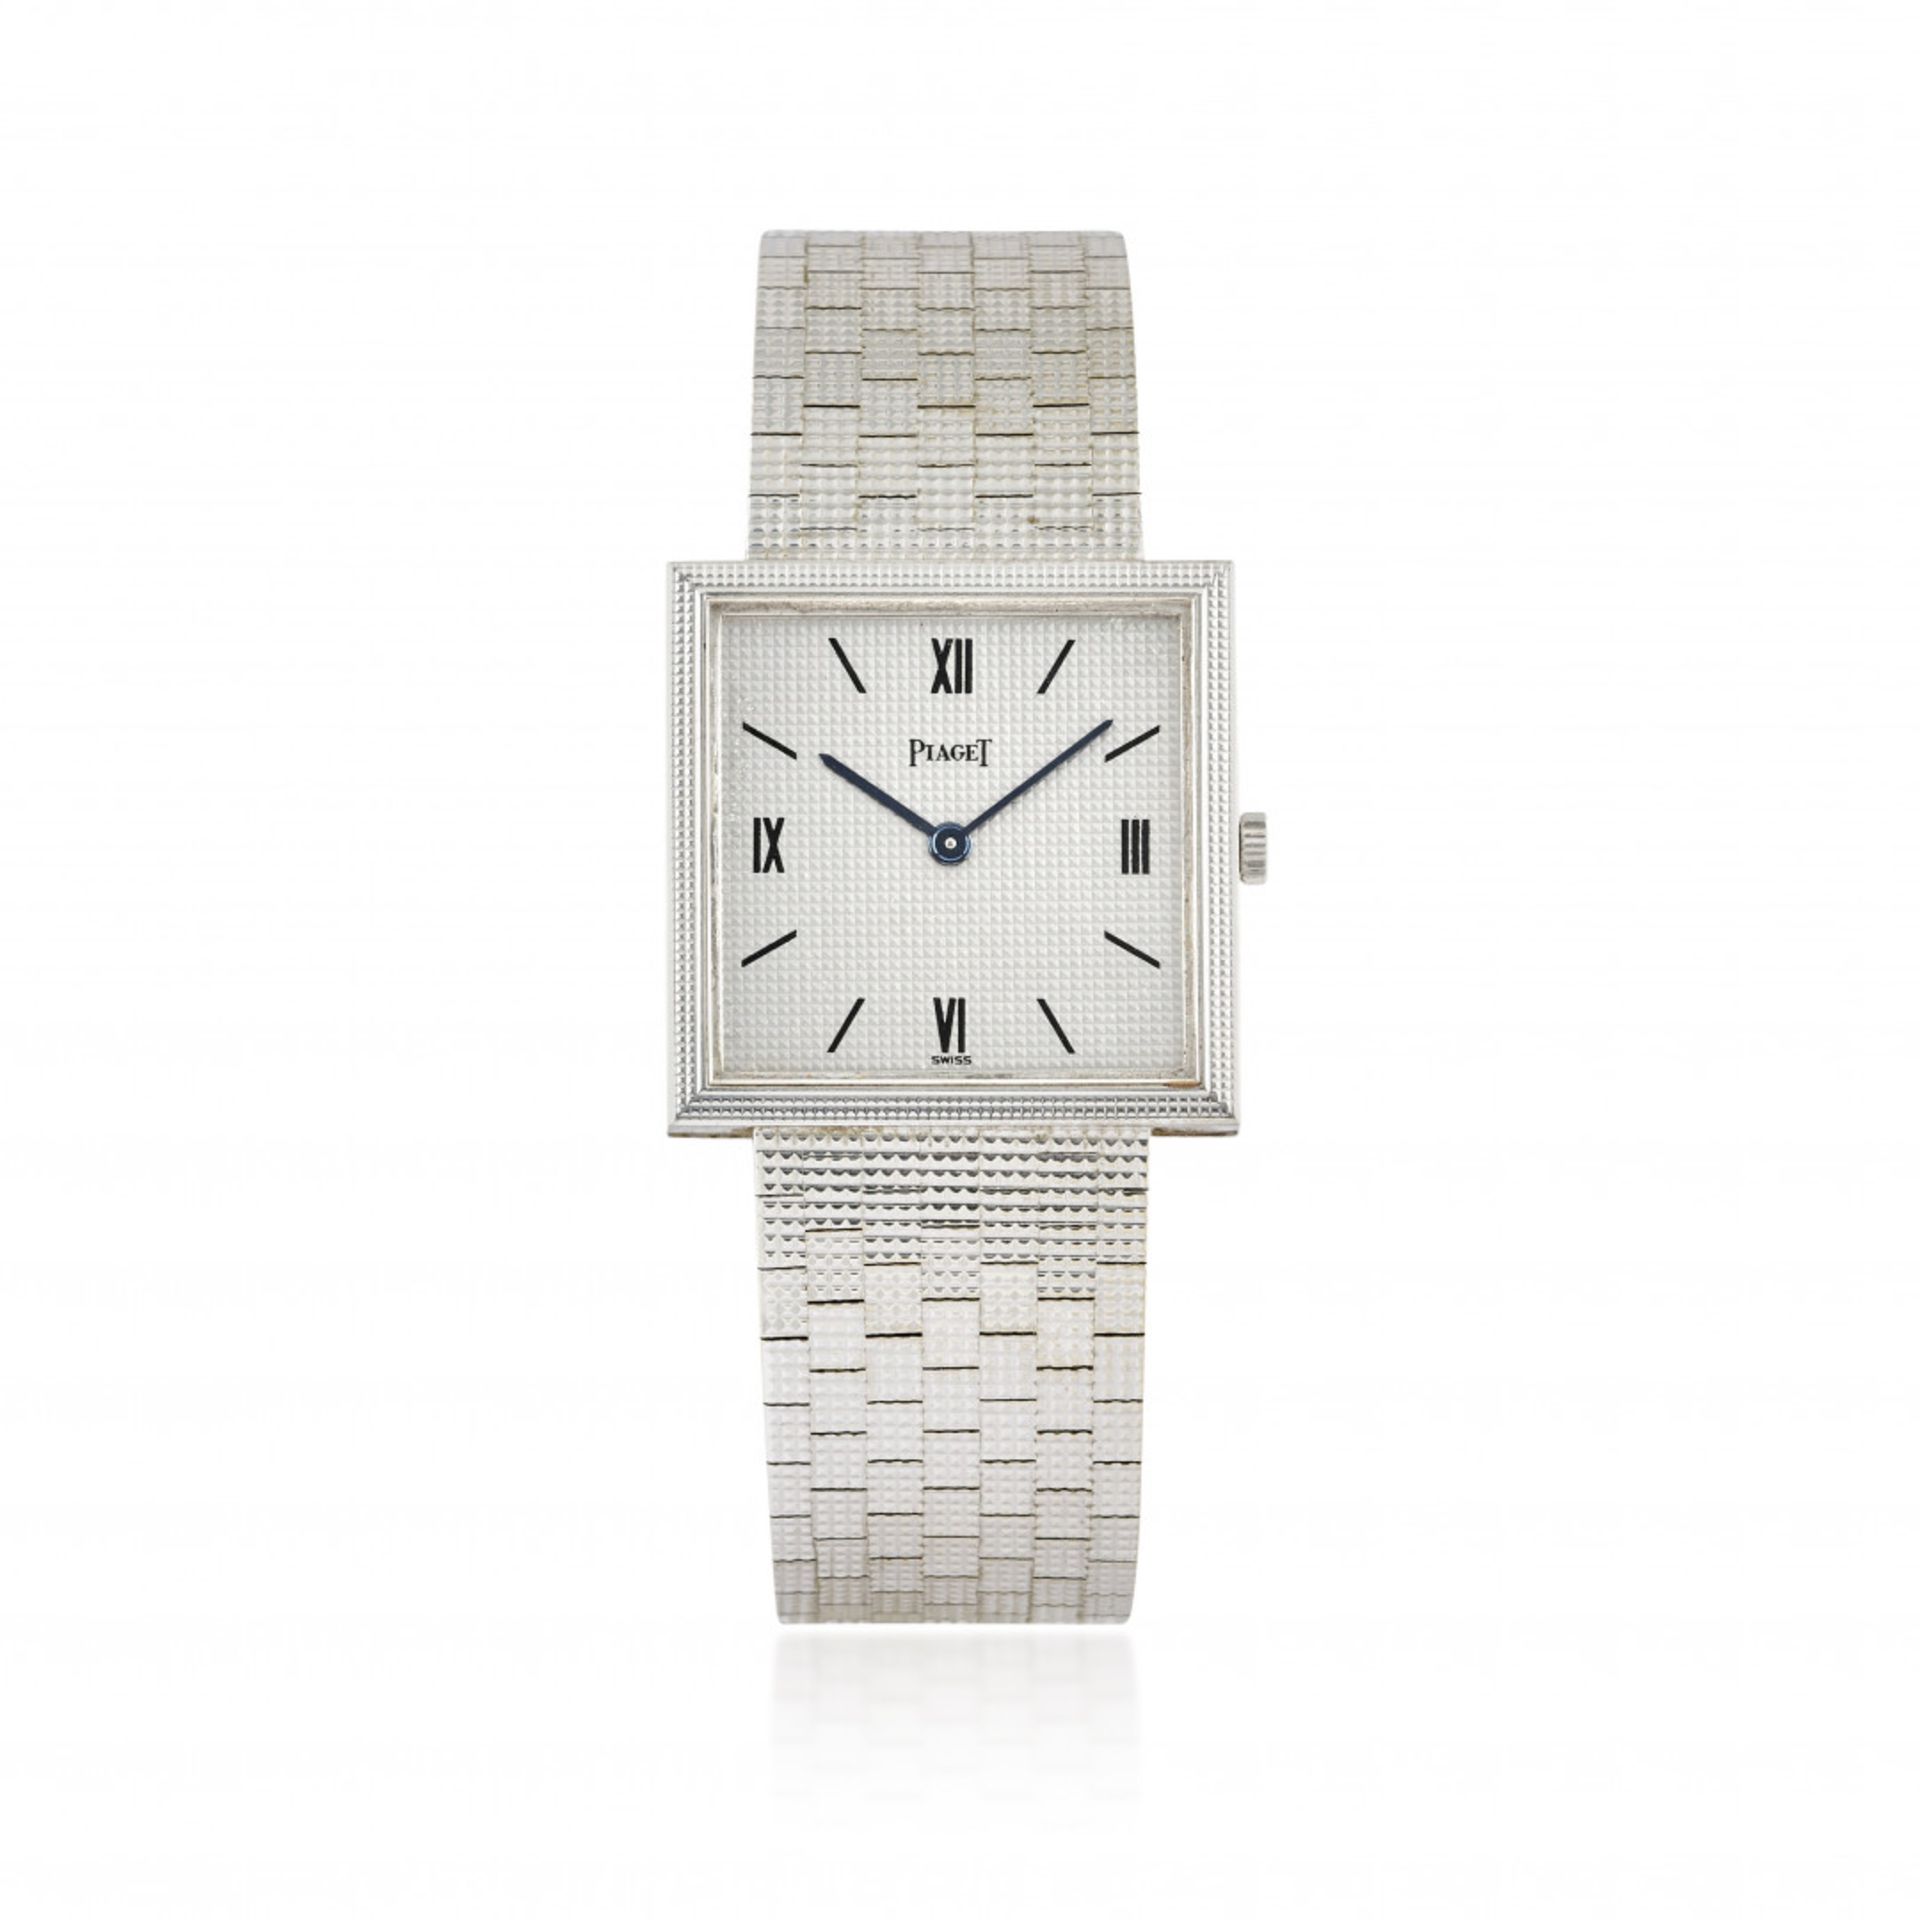 PIAGET REF. 93404 IN WHITE GOLD, 70s